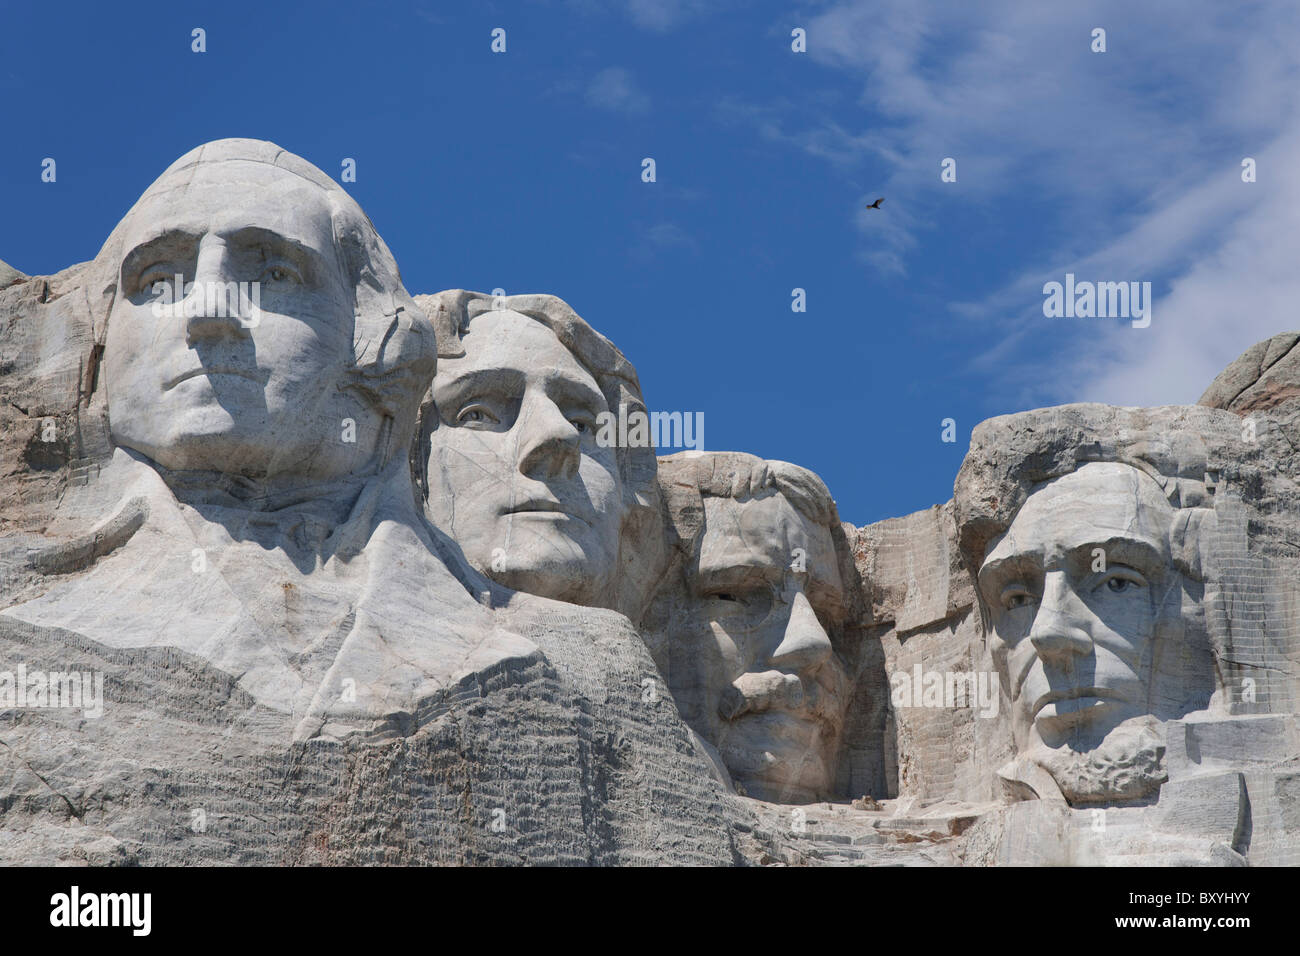 Mount Rushmore National Memorial Banque D'Images